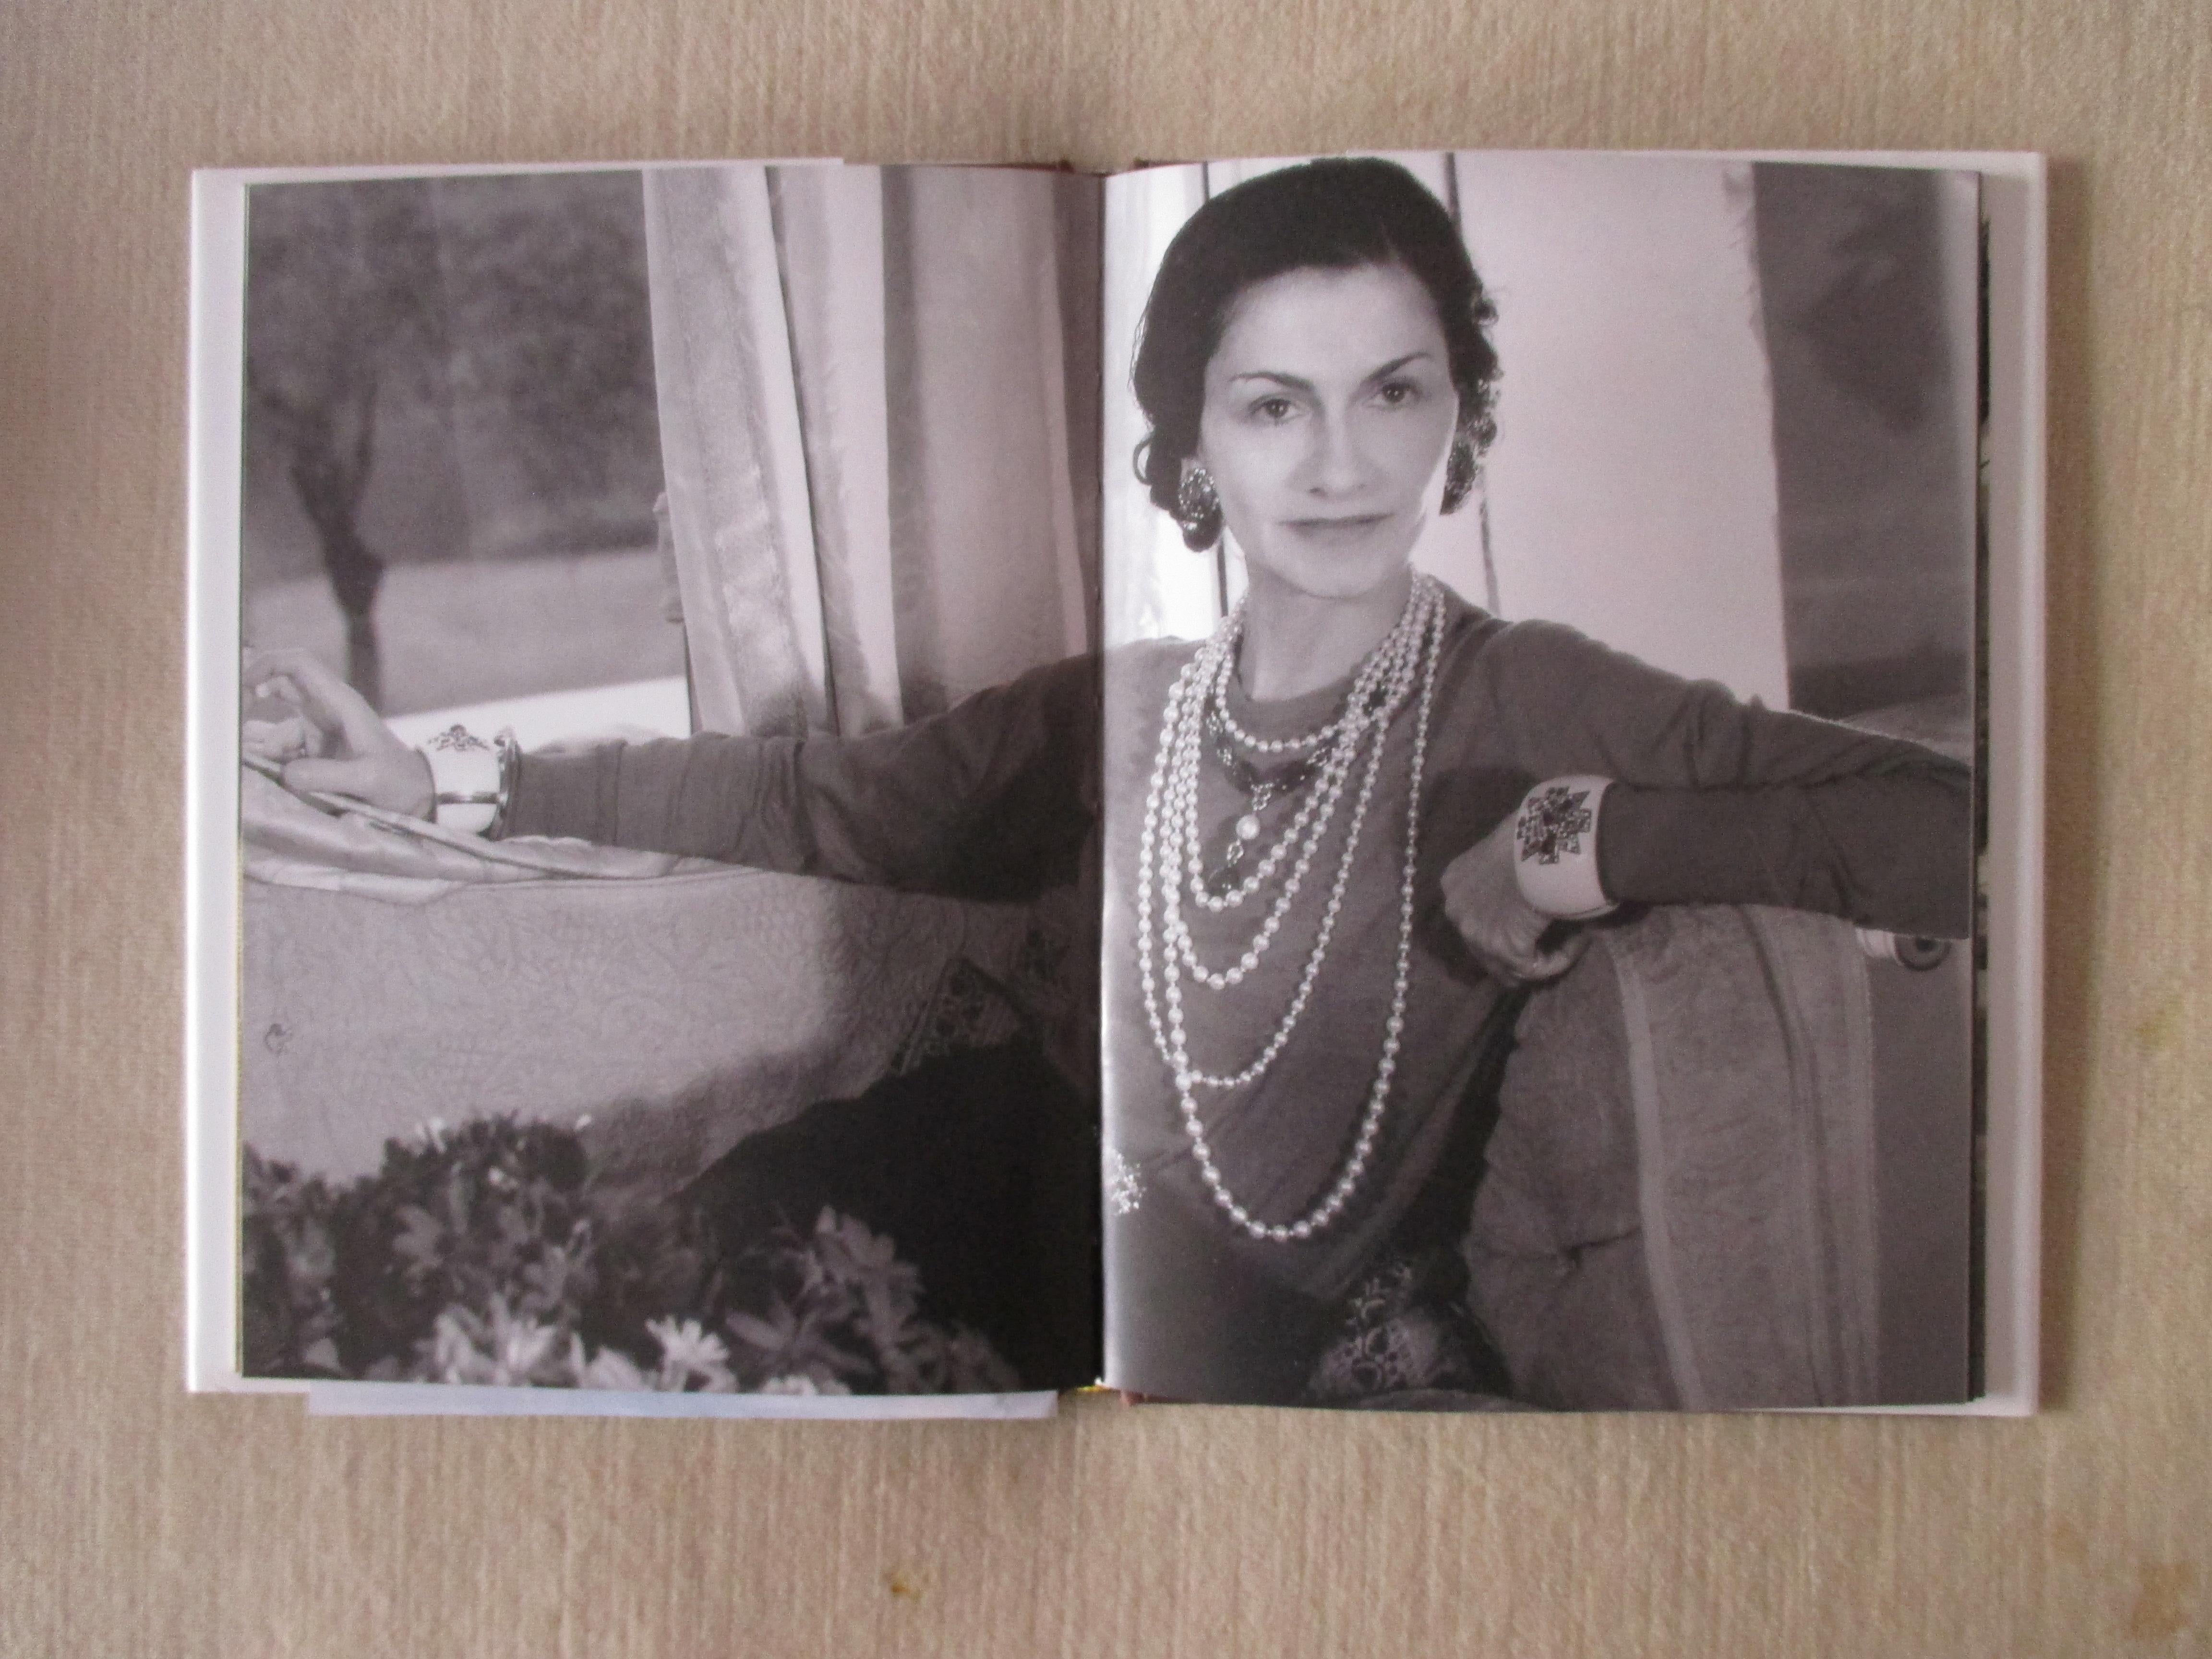 Vintage Chanel book by Aussoline
One of the most visible personalities of her era, Gabrielle Chanel invented a style synonymous with modernity and chic. She had the ability not only to predict the evolution of contemporary fashion, but also to see